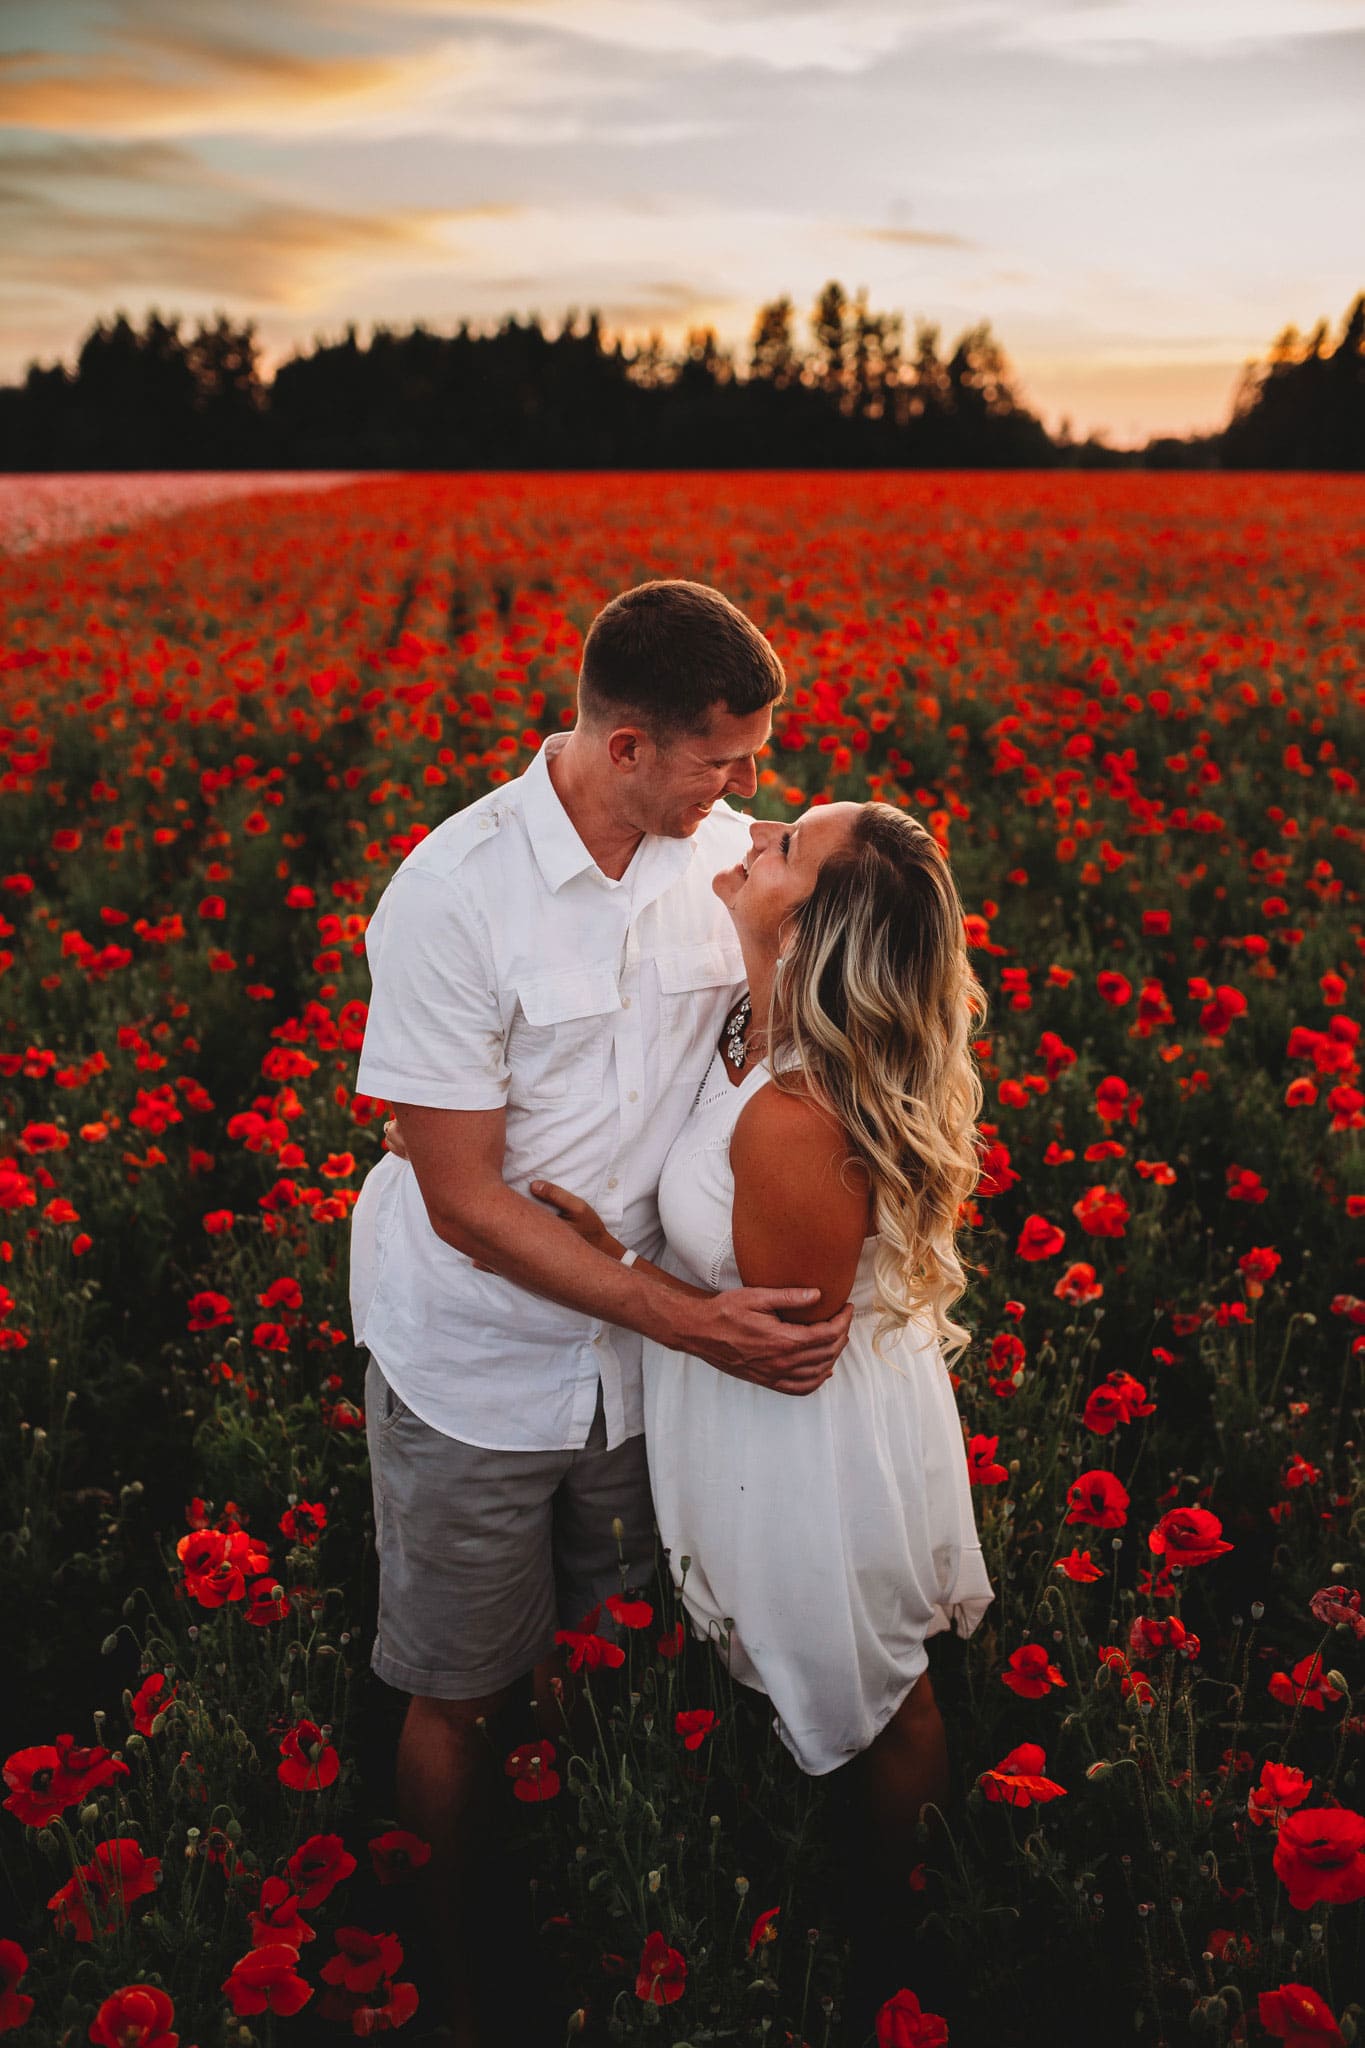 Couple smiling at each other with poppies surrounding them